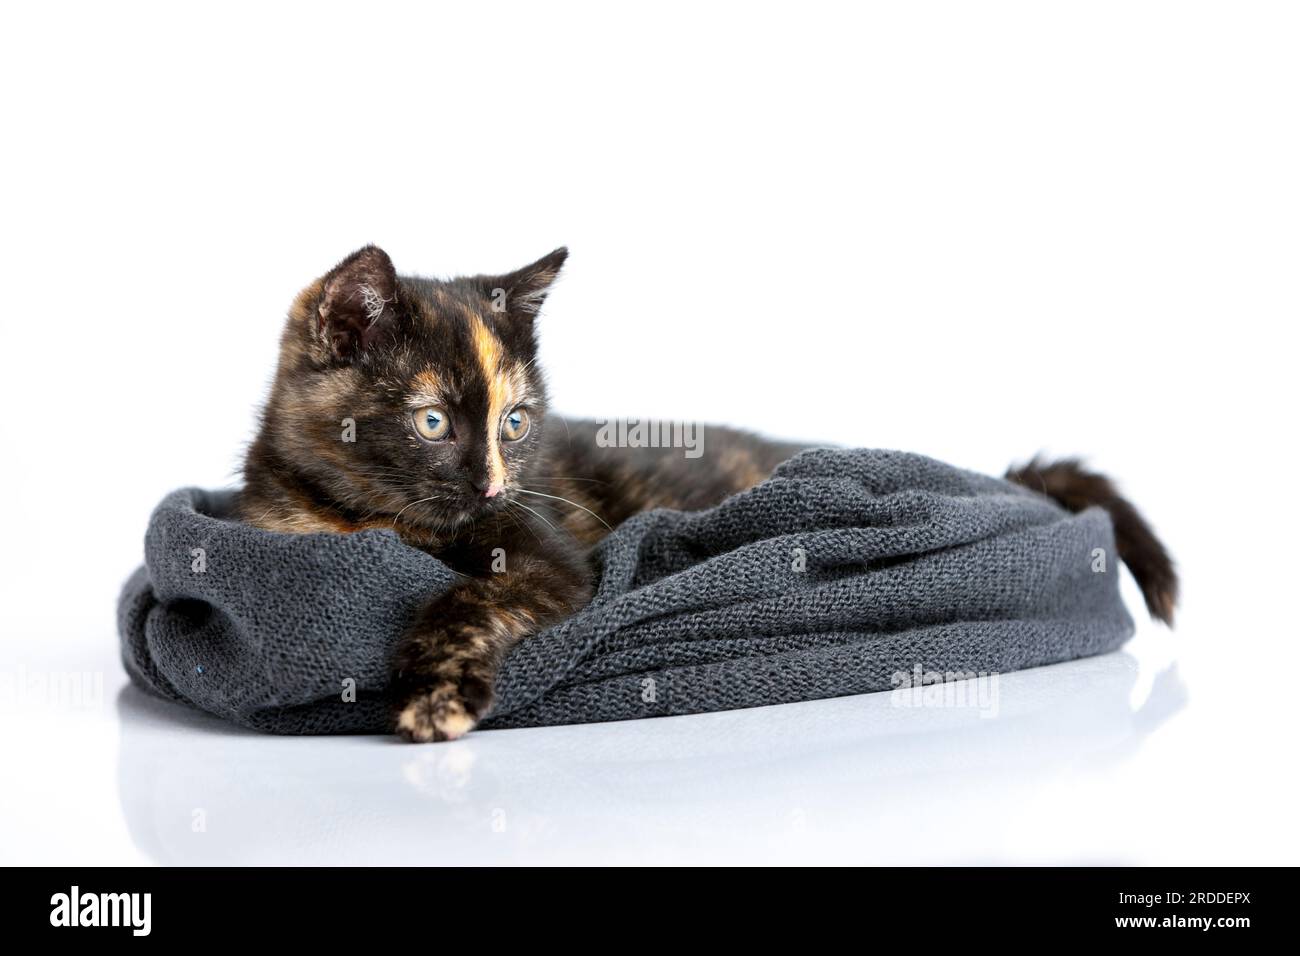 A reclining, colorful tortoiseshell cat lies in a scarf and looks to the right, carefully observing. Stock Photo